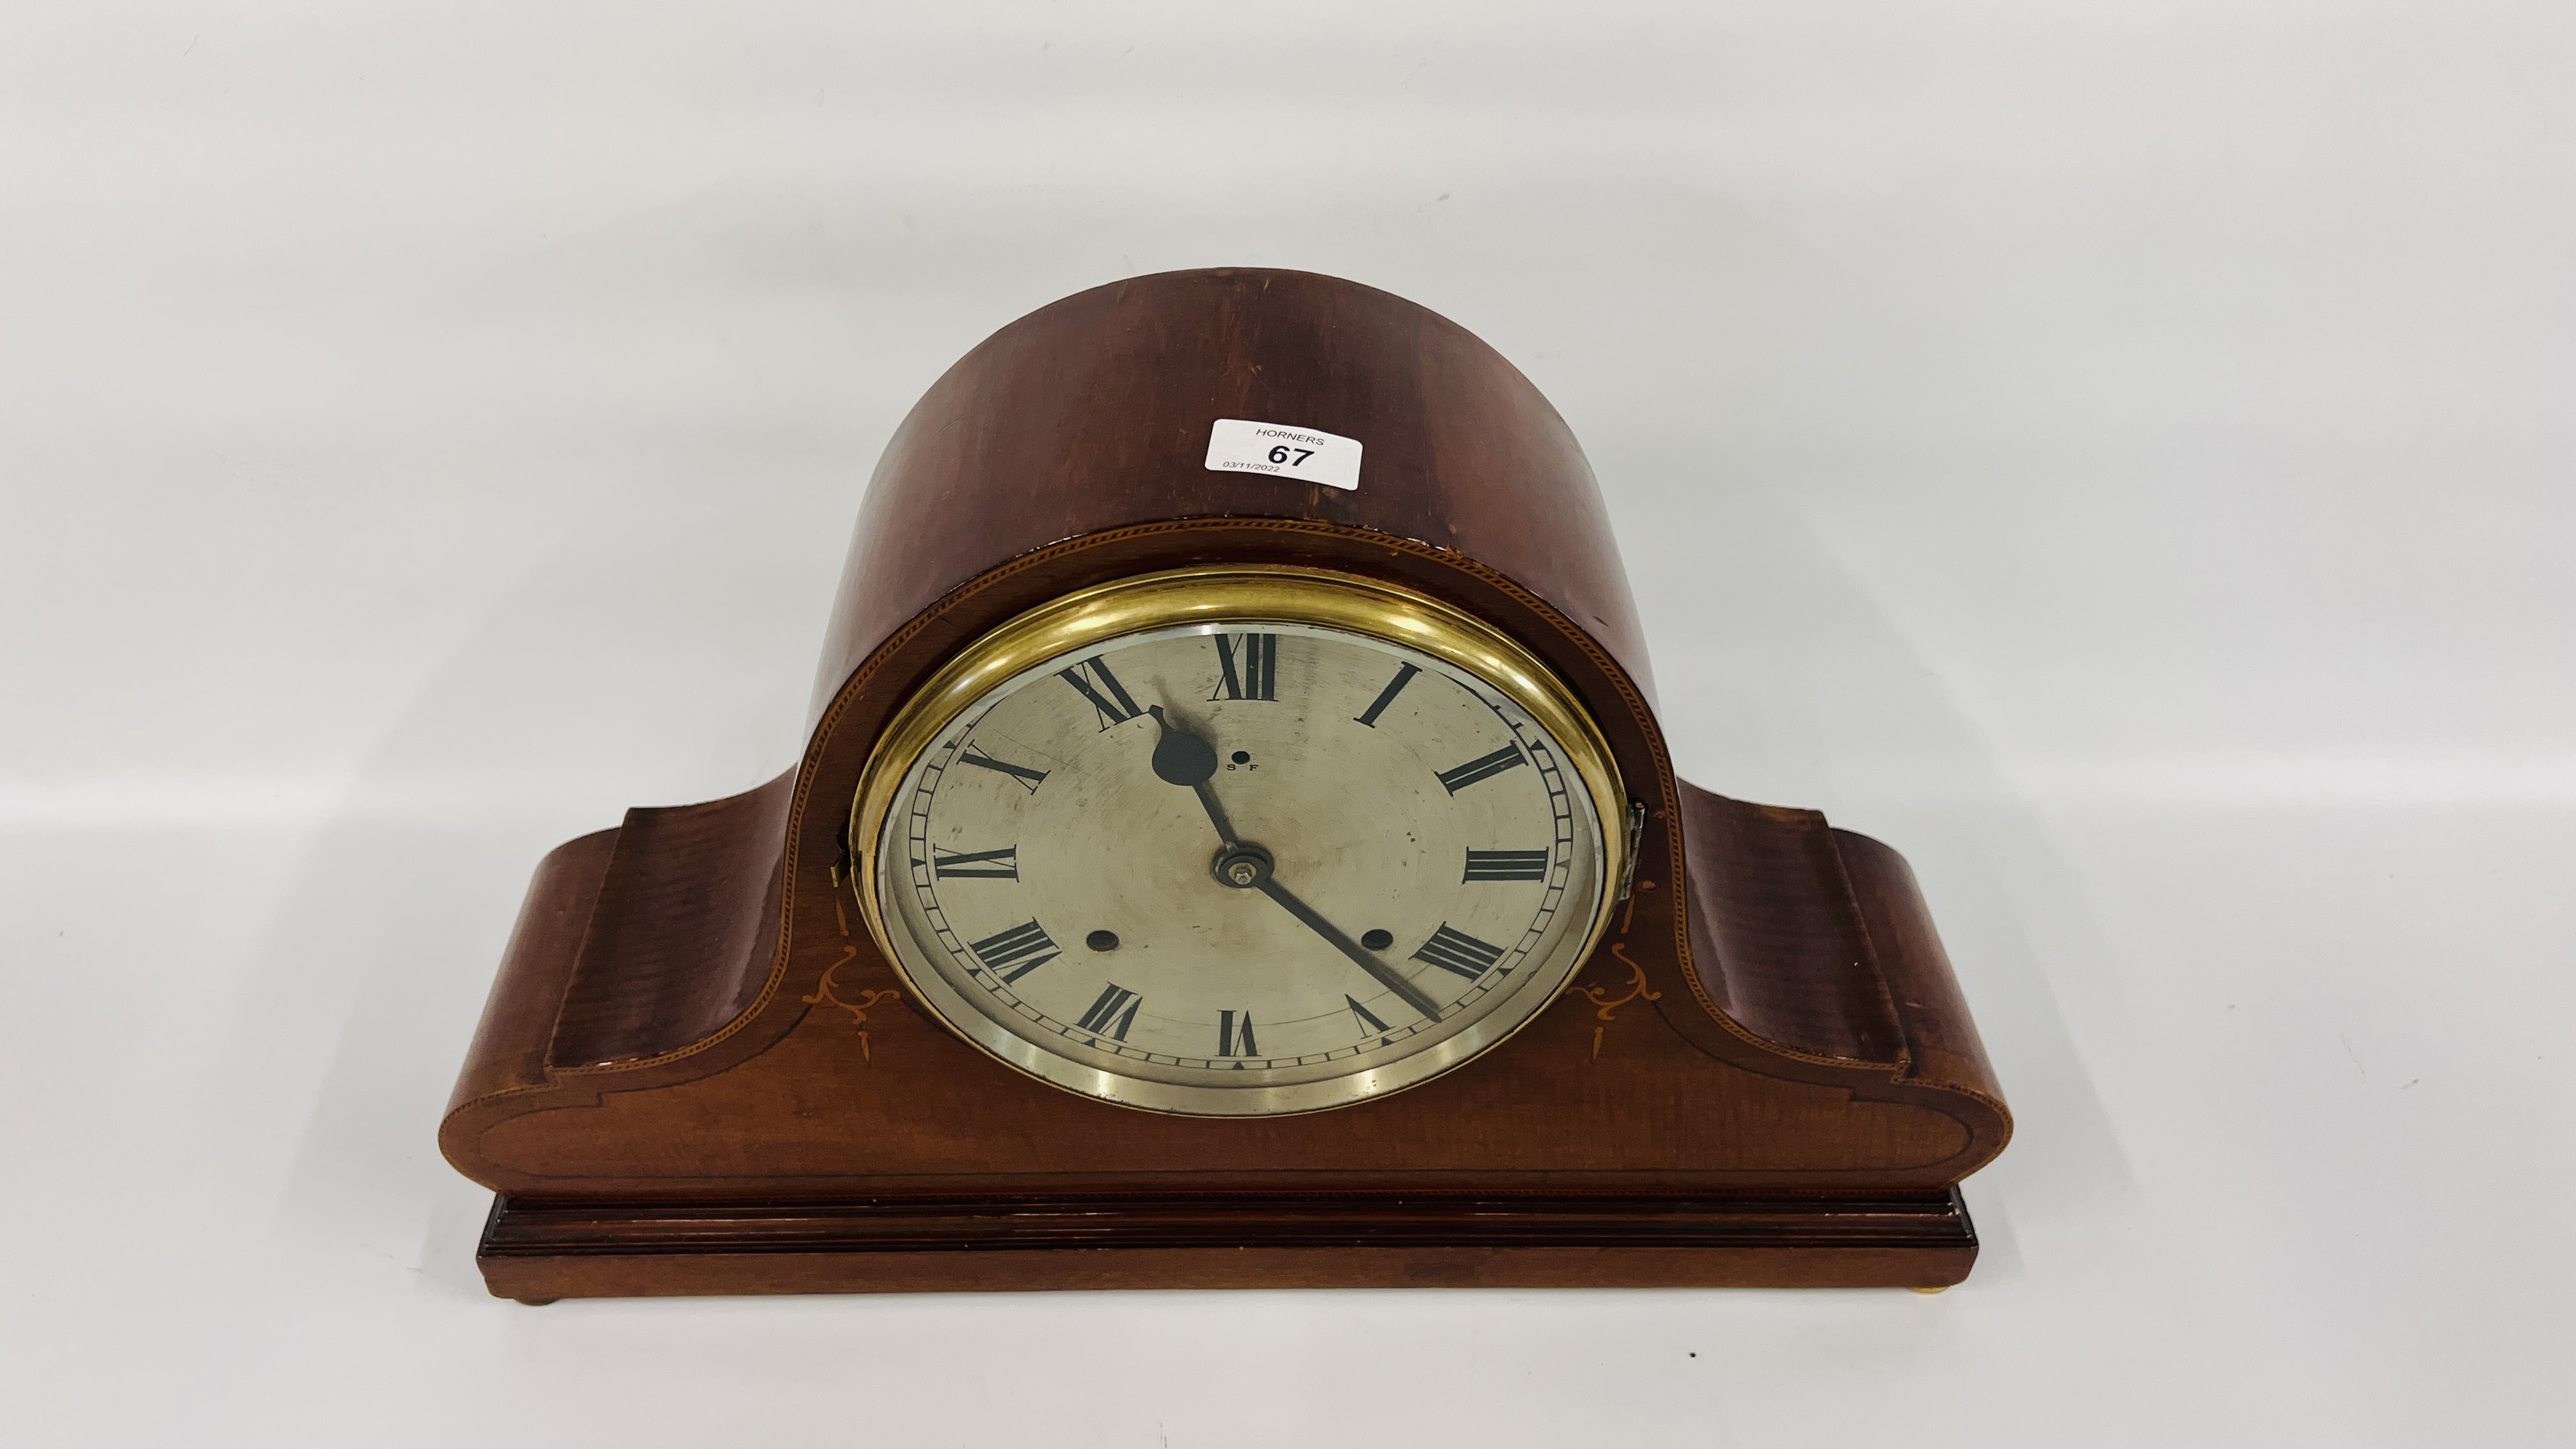 AN EDWARDIAN INLAID MANTEL CLOCK MARKED "S.F." HEIGHT 33CM. - Image 2 of 6